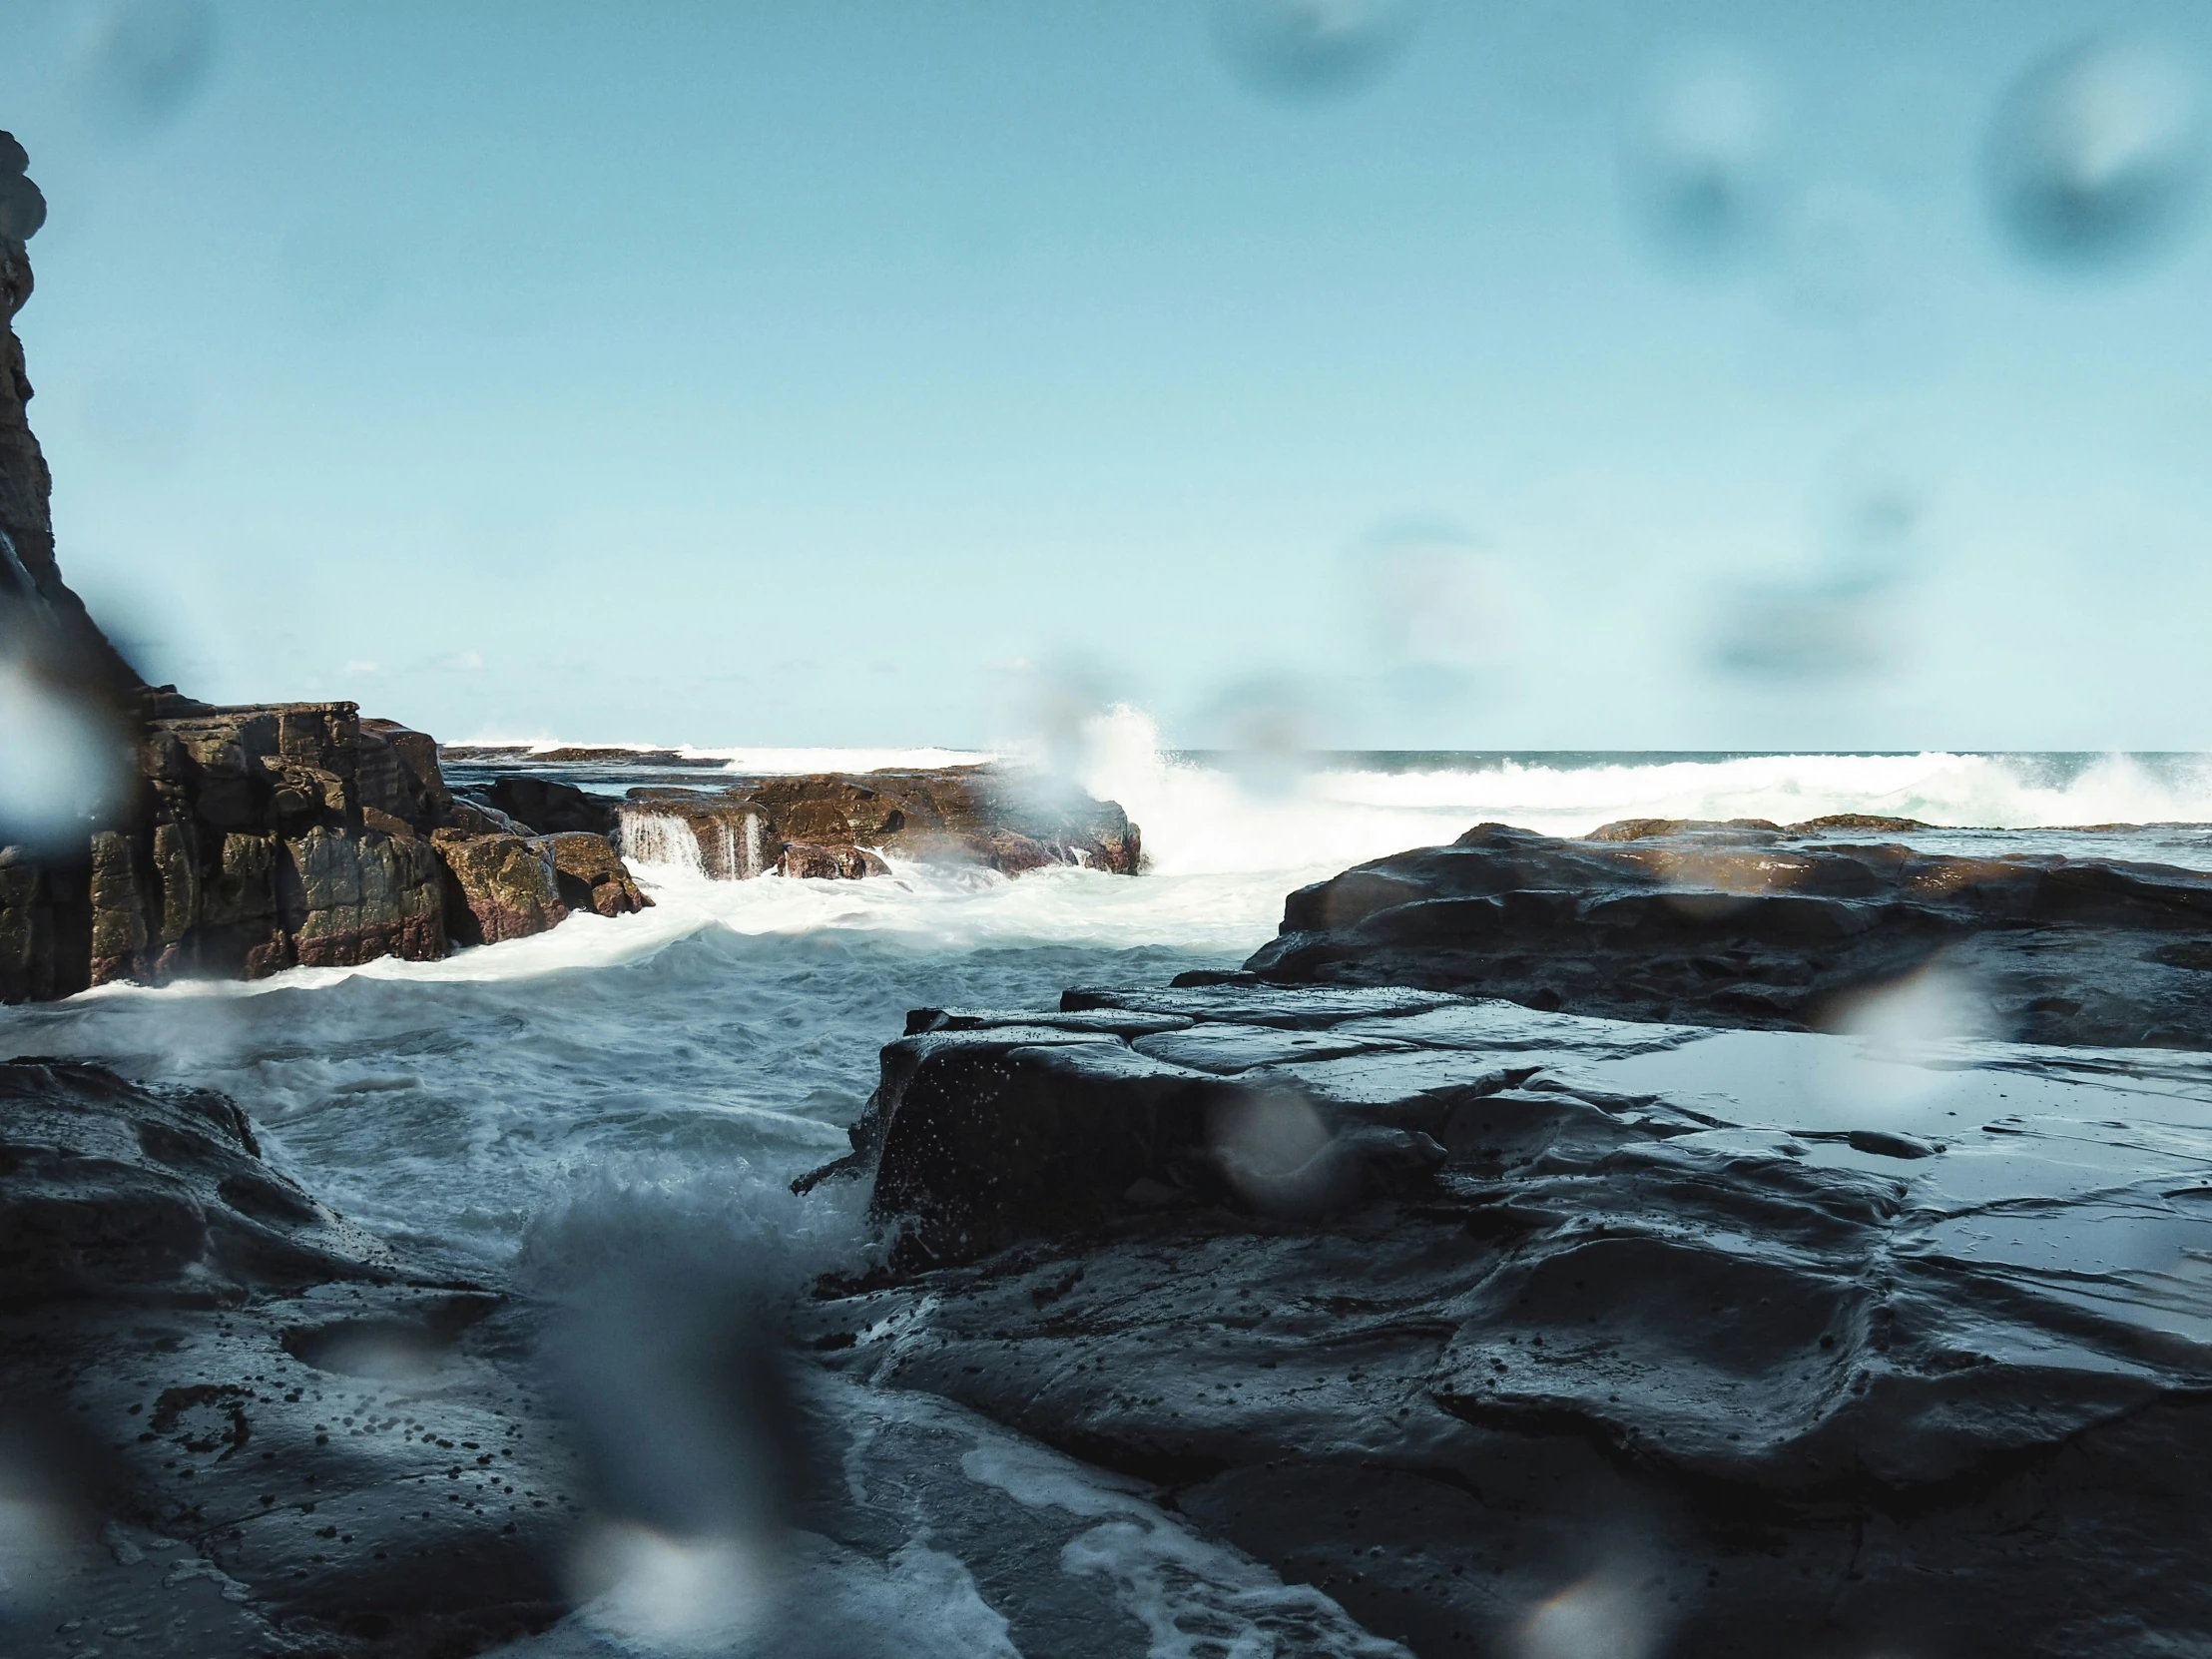 the view out through water drops onto rocks near the ocean